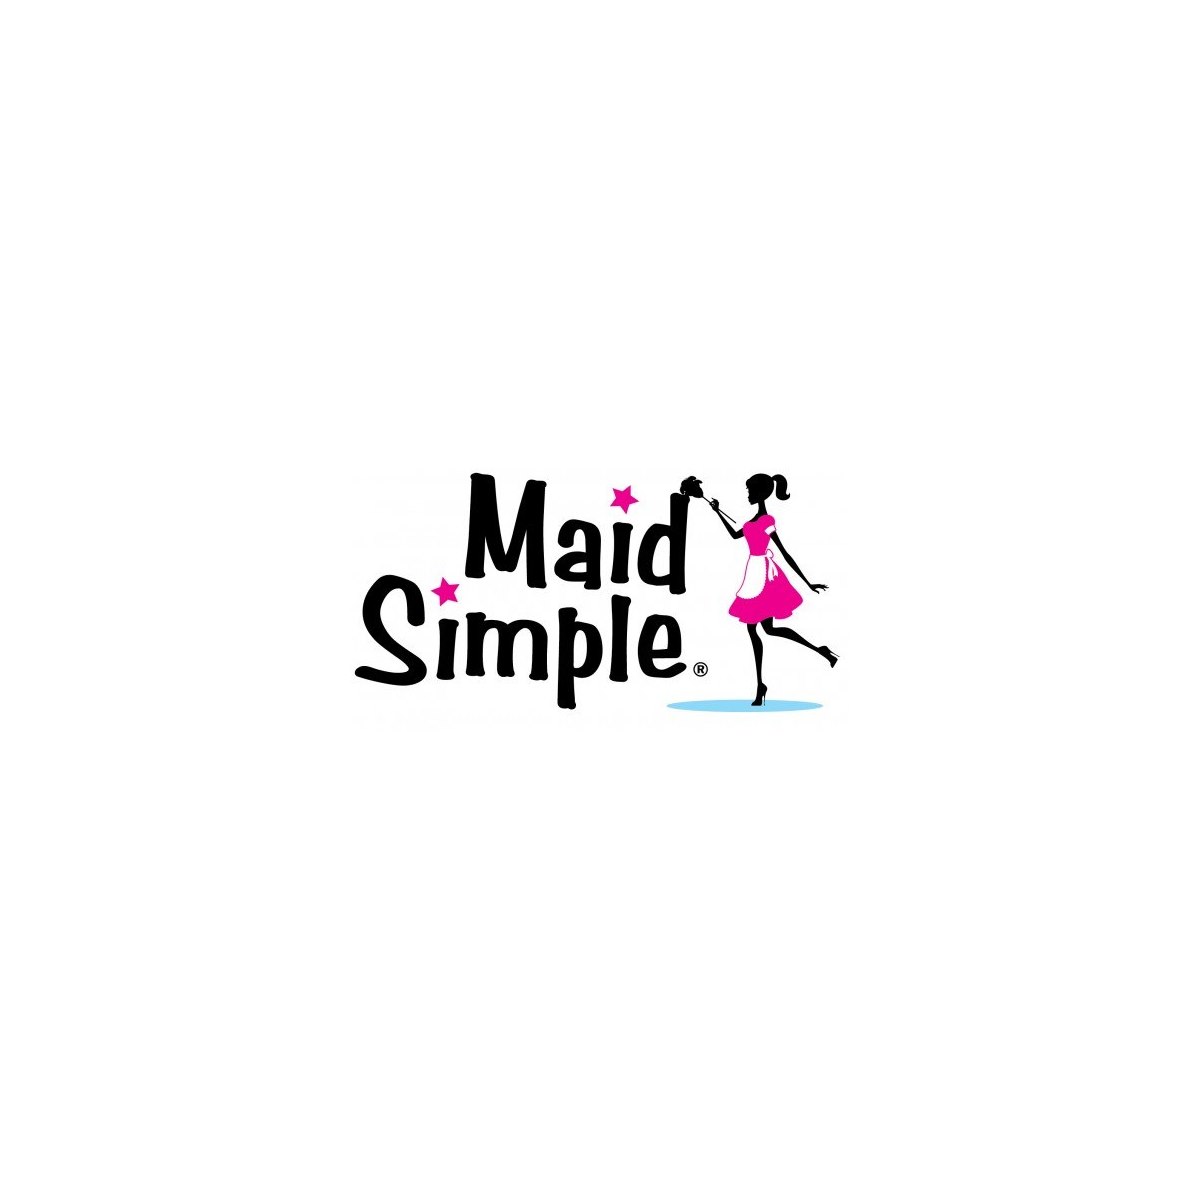 Where to buy Maid Simple Cleaning Products